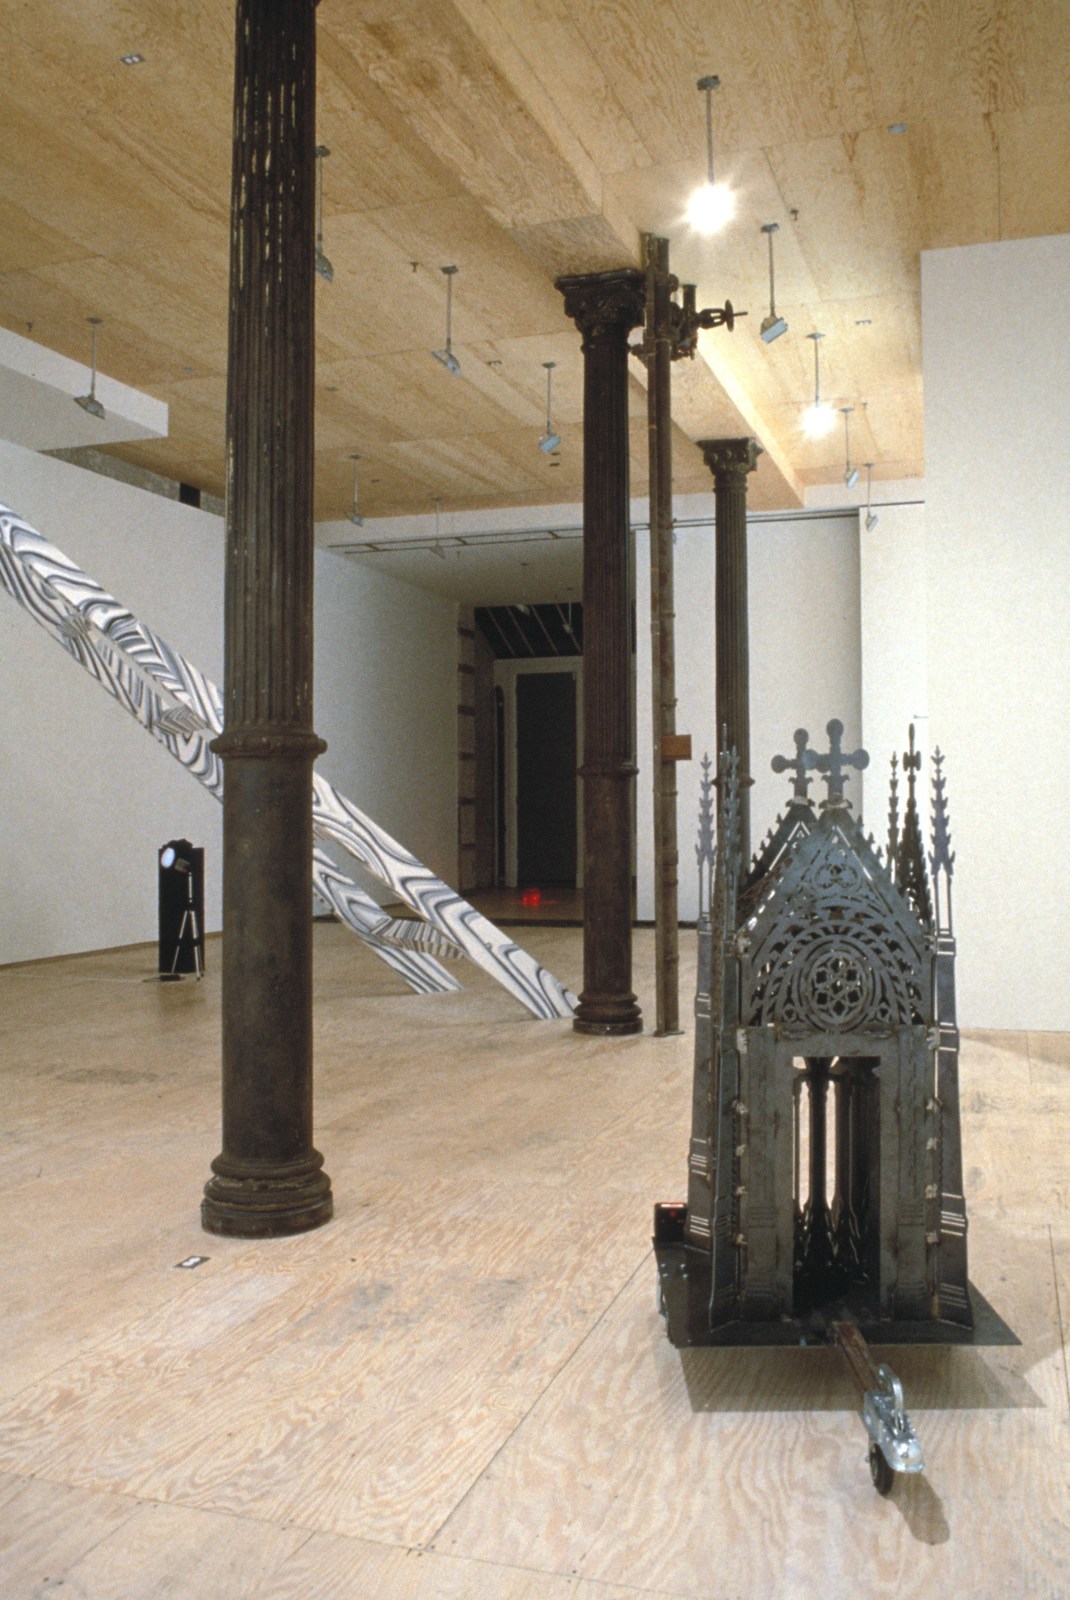 Installation view of Moving Structures at Lehmann Maupin in New York, view 2